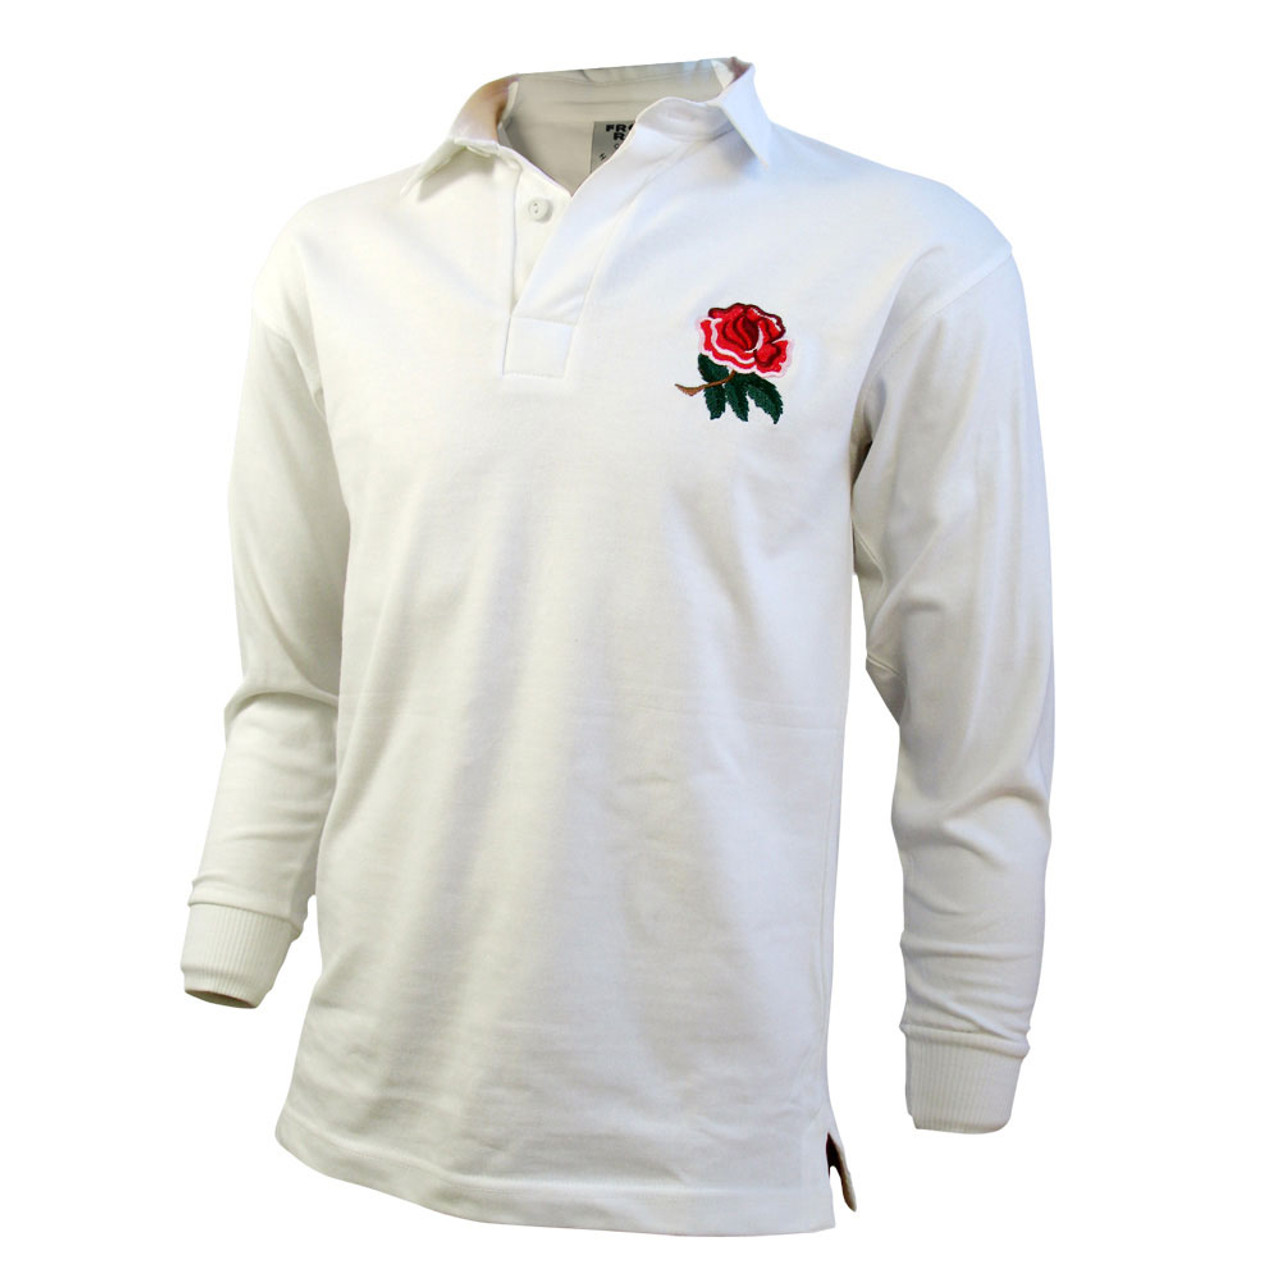 england rugby shirt 2 year old